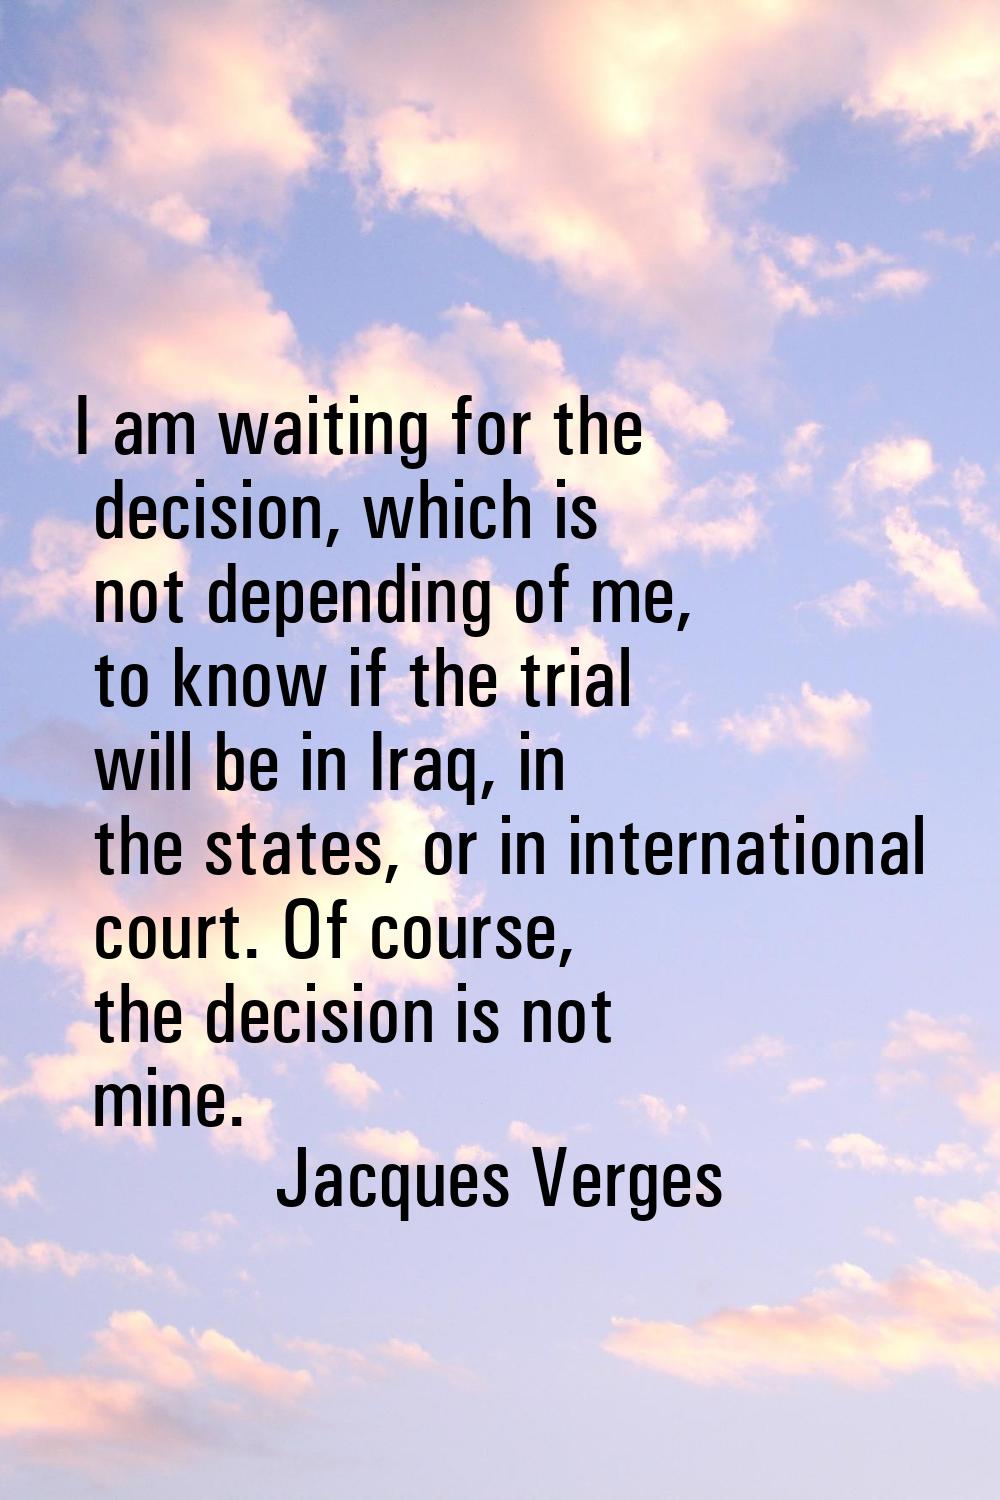 I am waiting for the decision, which is not depending of me, to know if the trial will be in Iraq, 